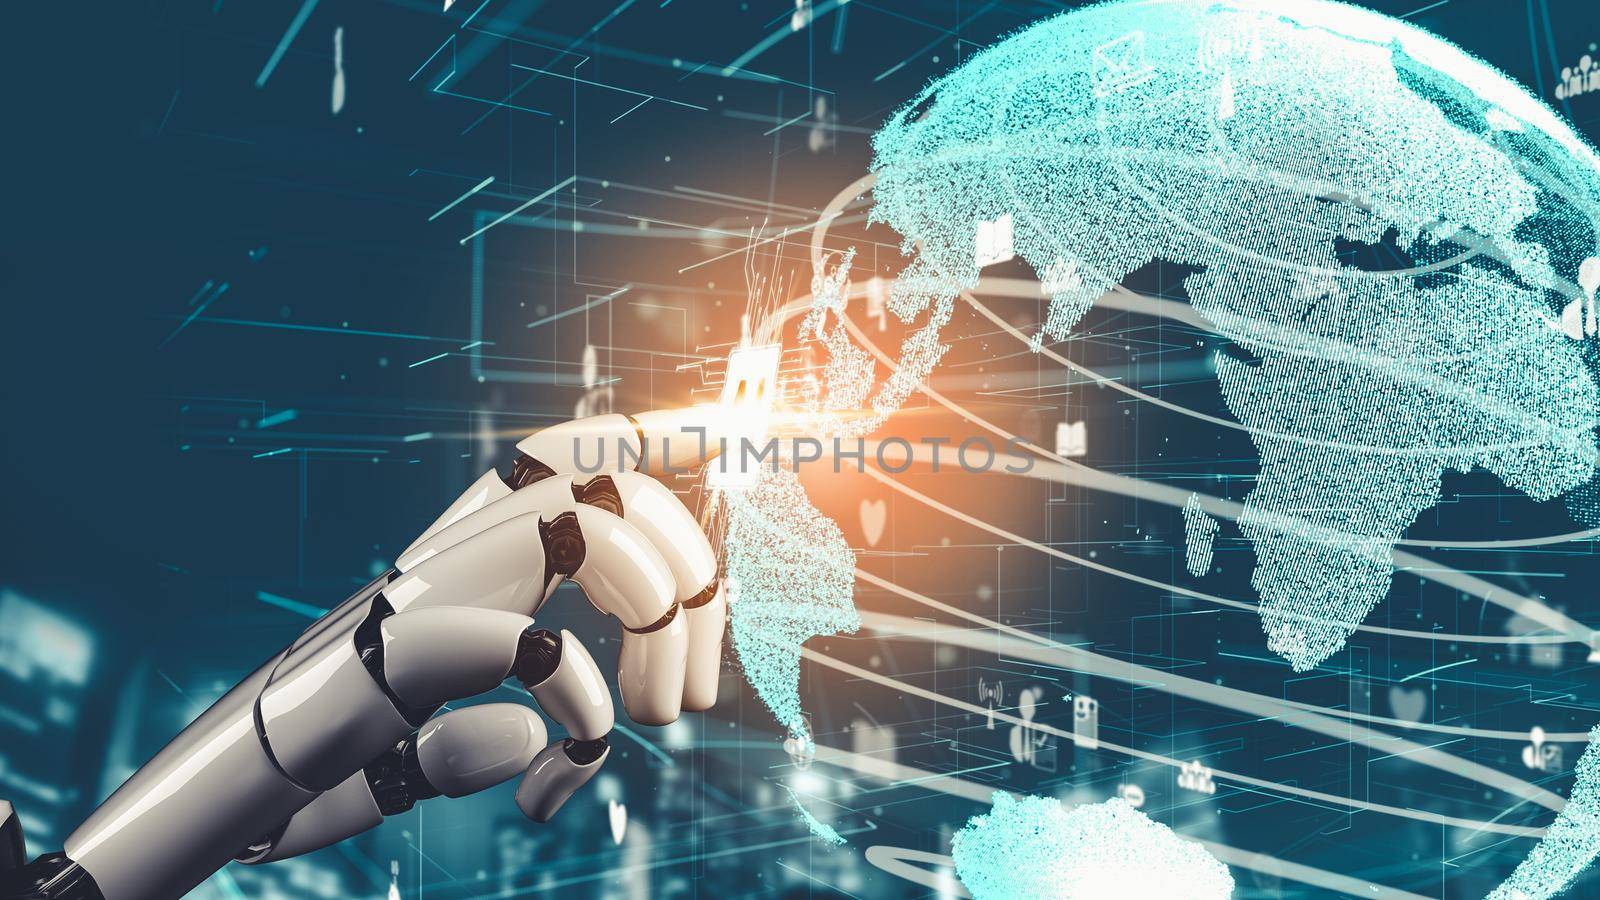 Futuristic robot artificial intelligence revolutionary AI technology development and machine learning concept. Global robotic bionic science research for future of human life. 3D rendering graphic.